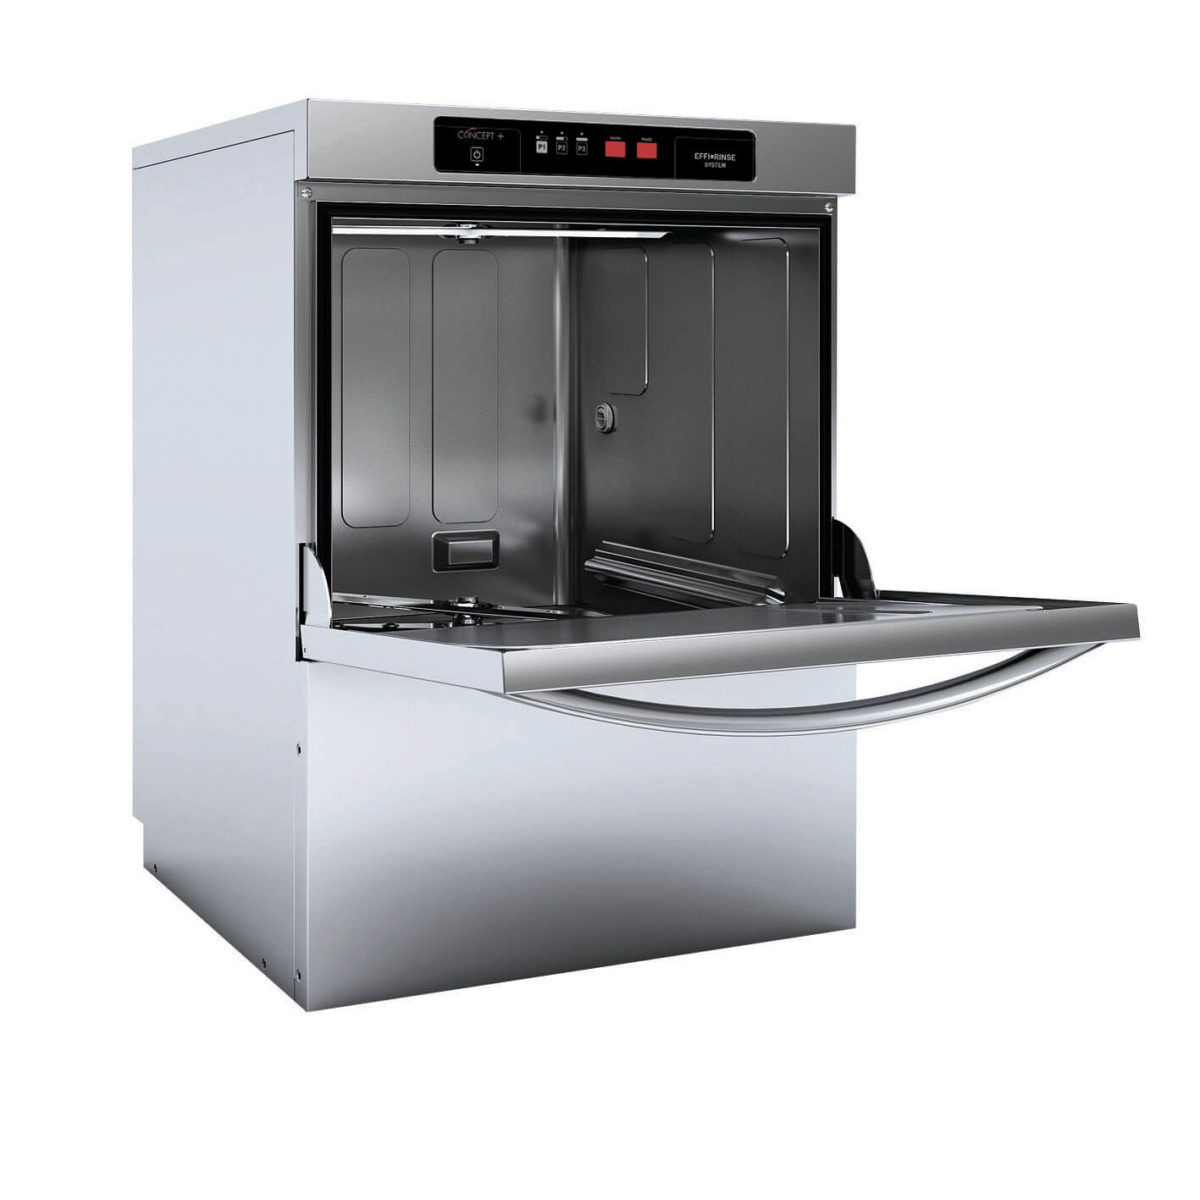 Fagor WS-CO-502 commercial dishwasher